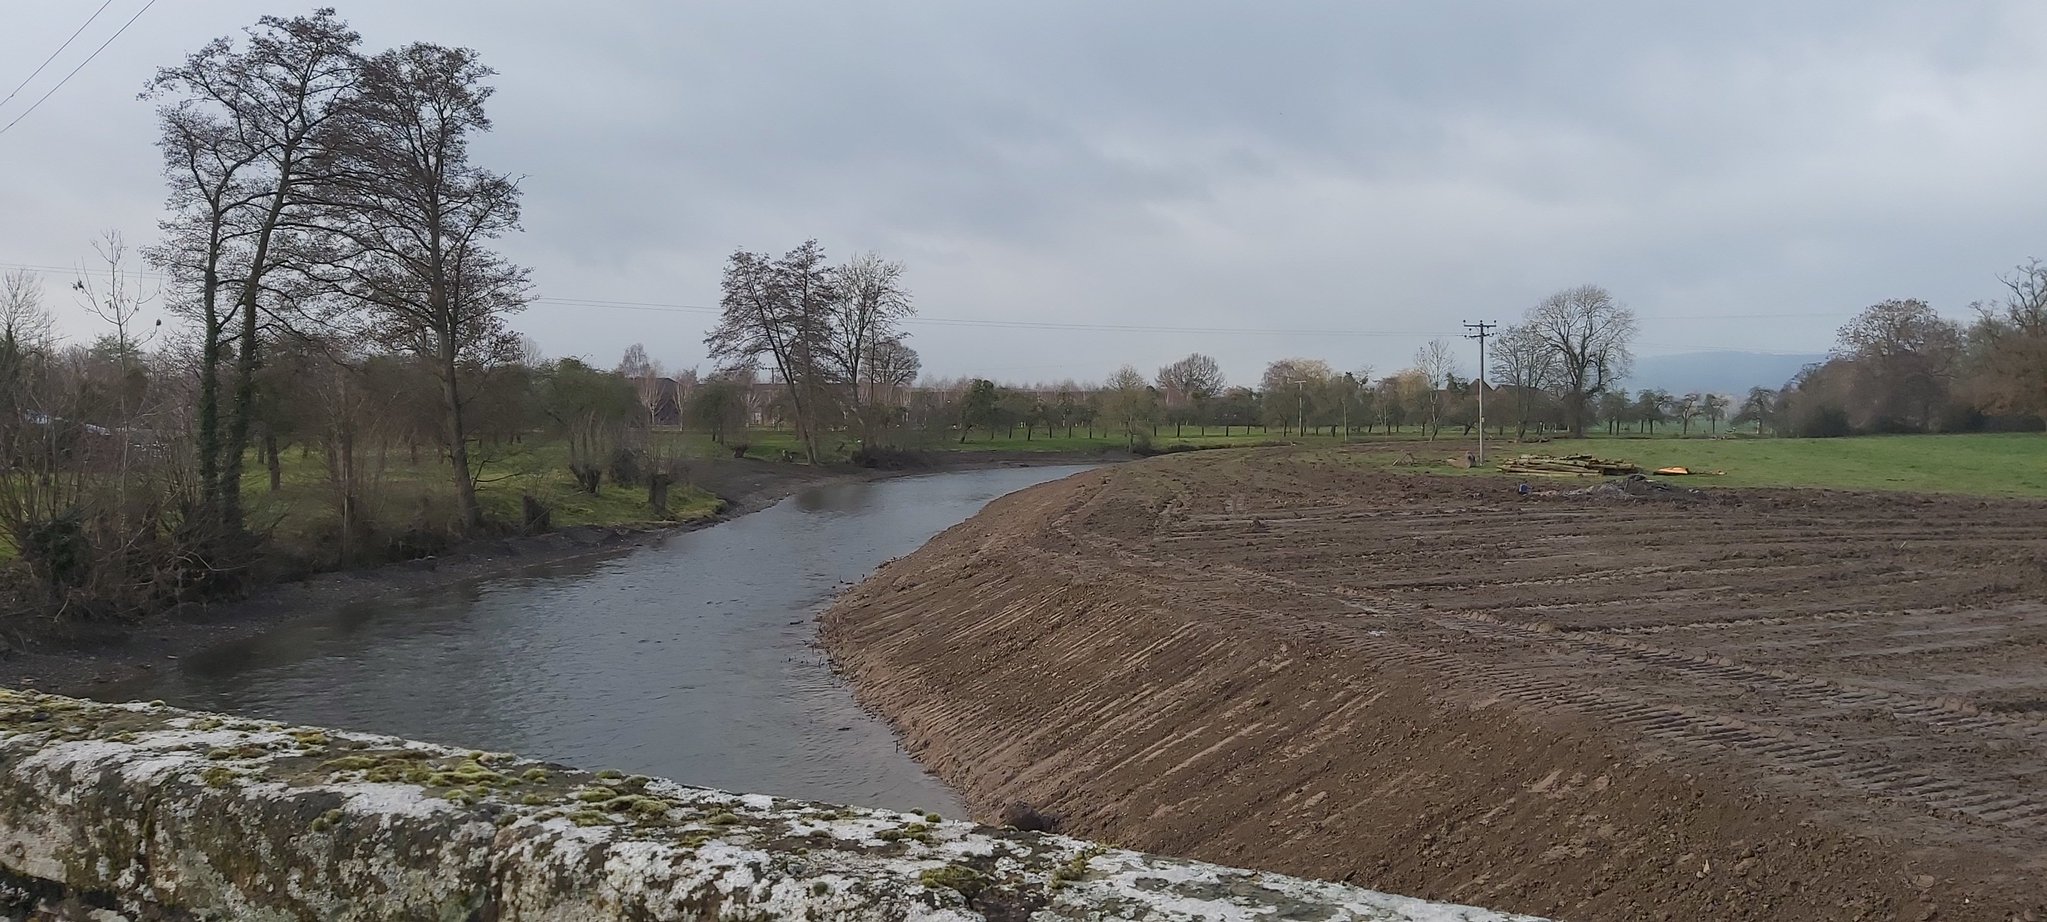 NEWS | Kingsland Parish Council issued statement on River Lugg incident